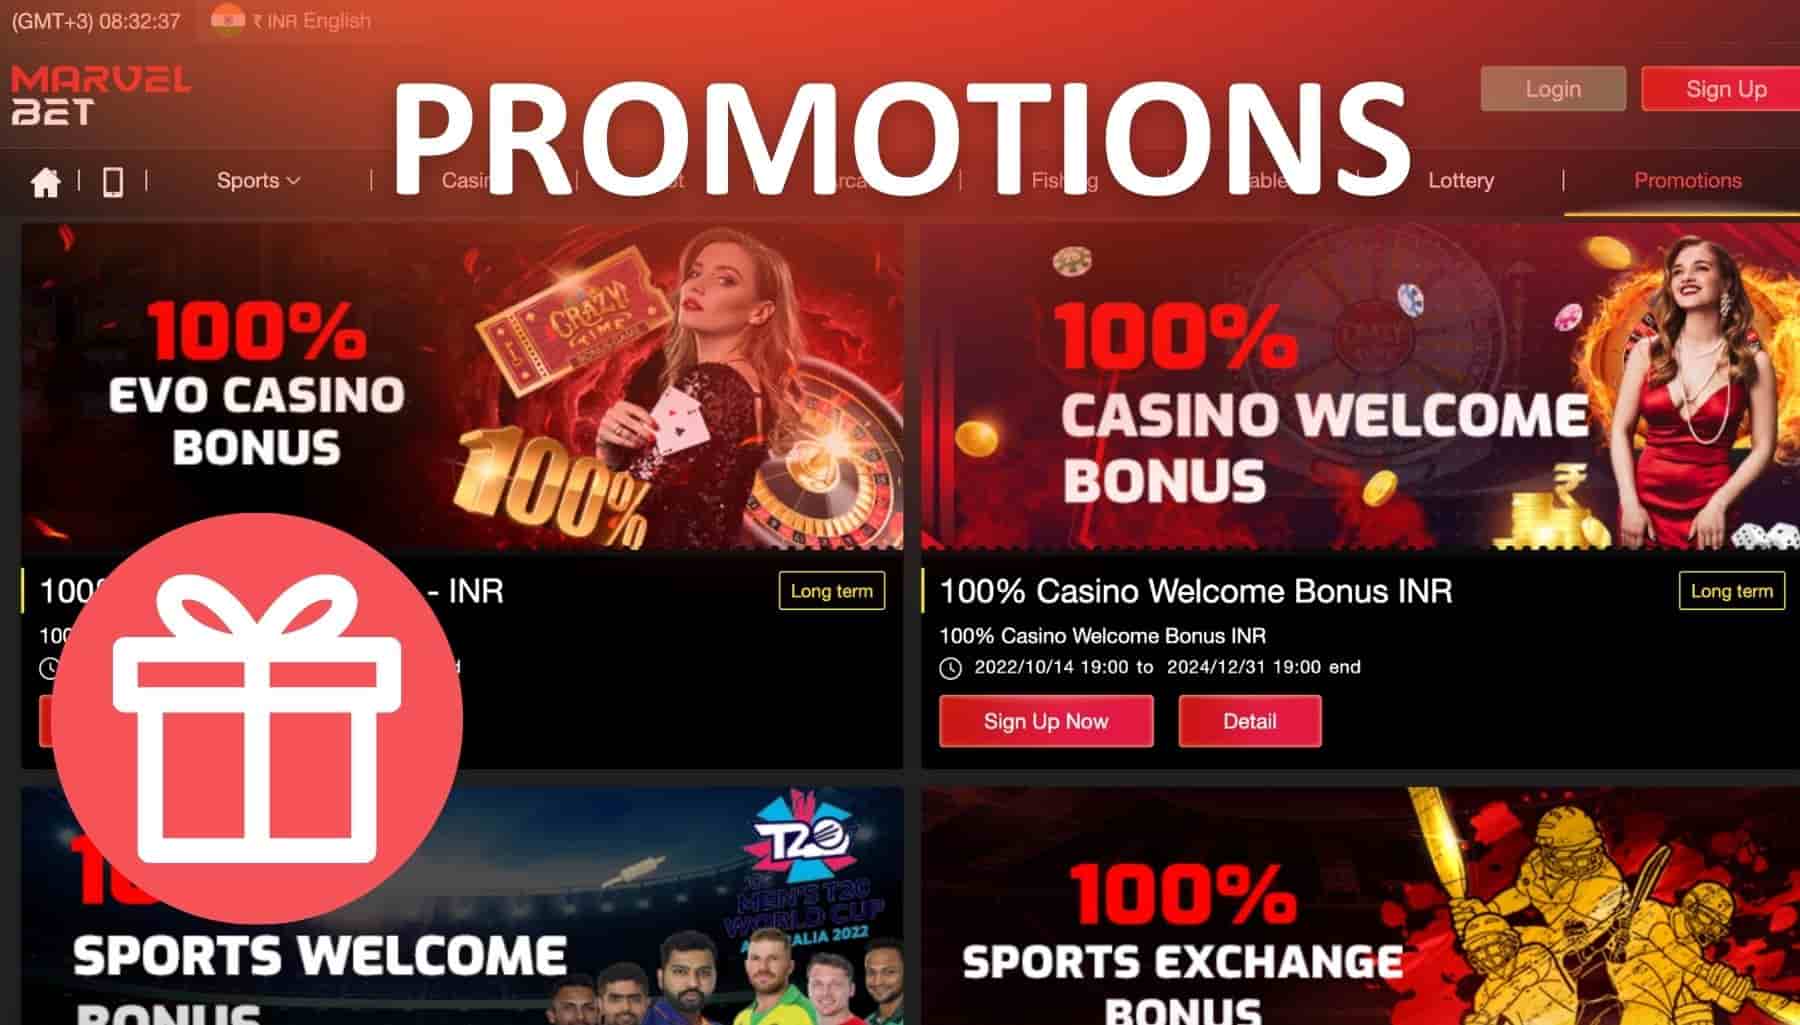 Marvelbet India gambling site Promotions guide